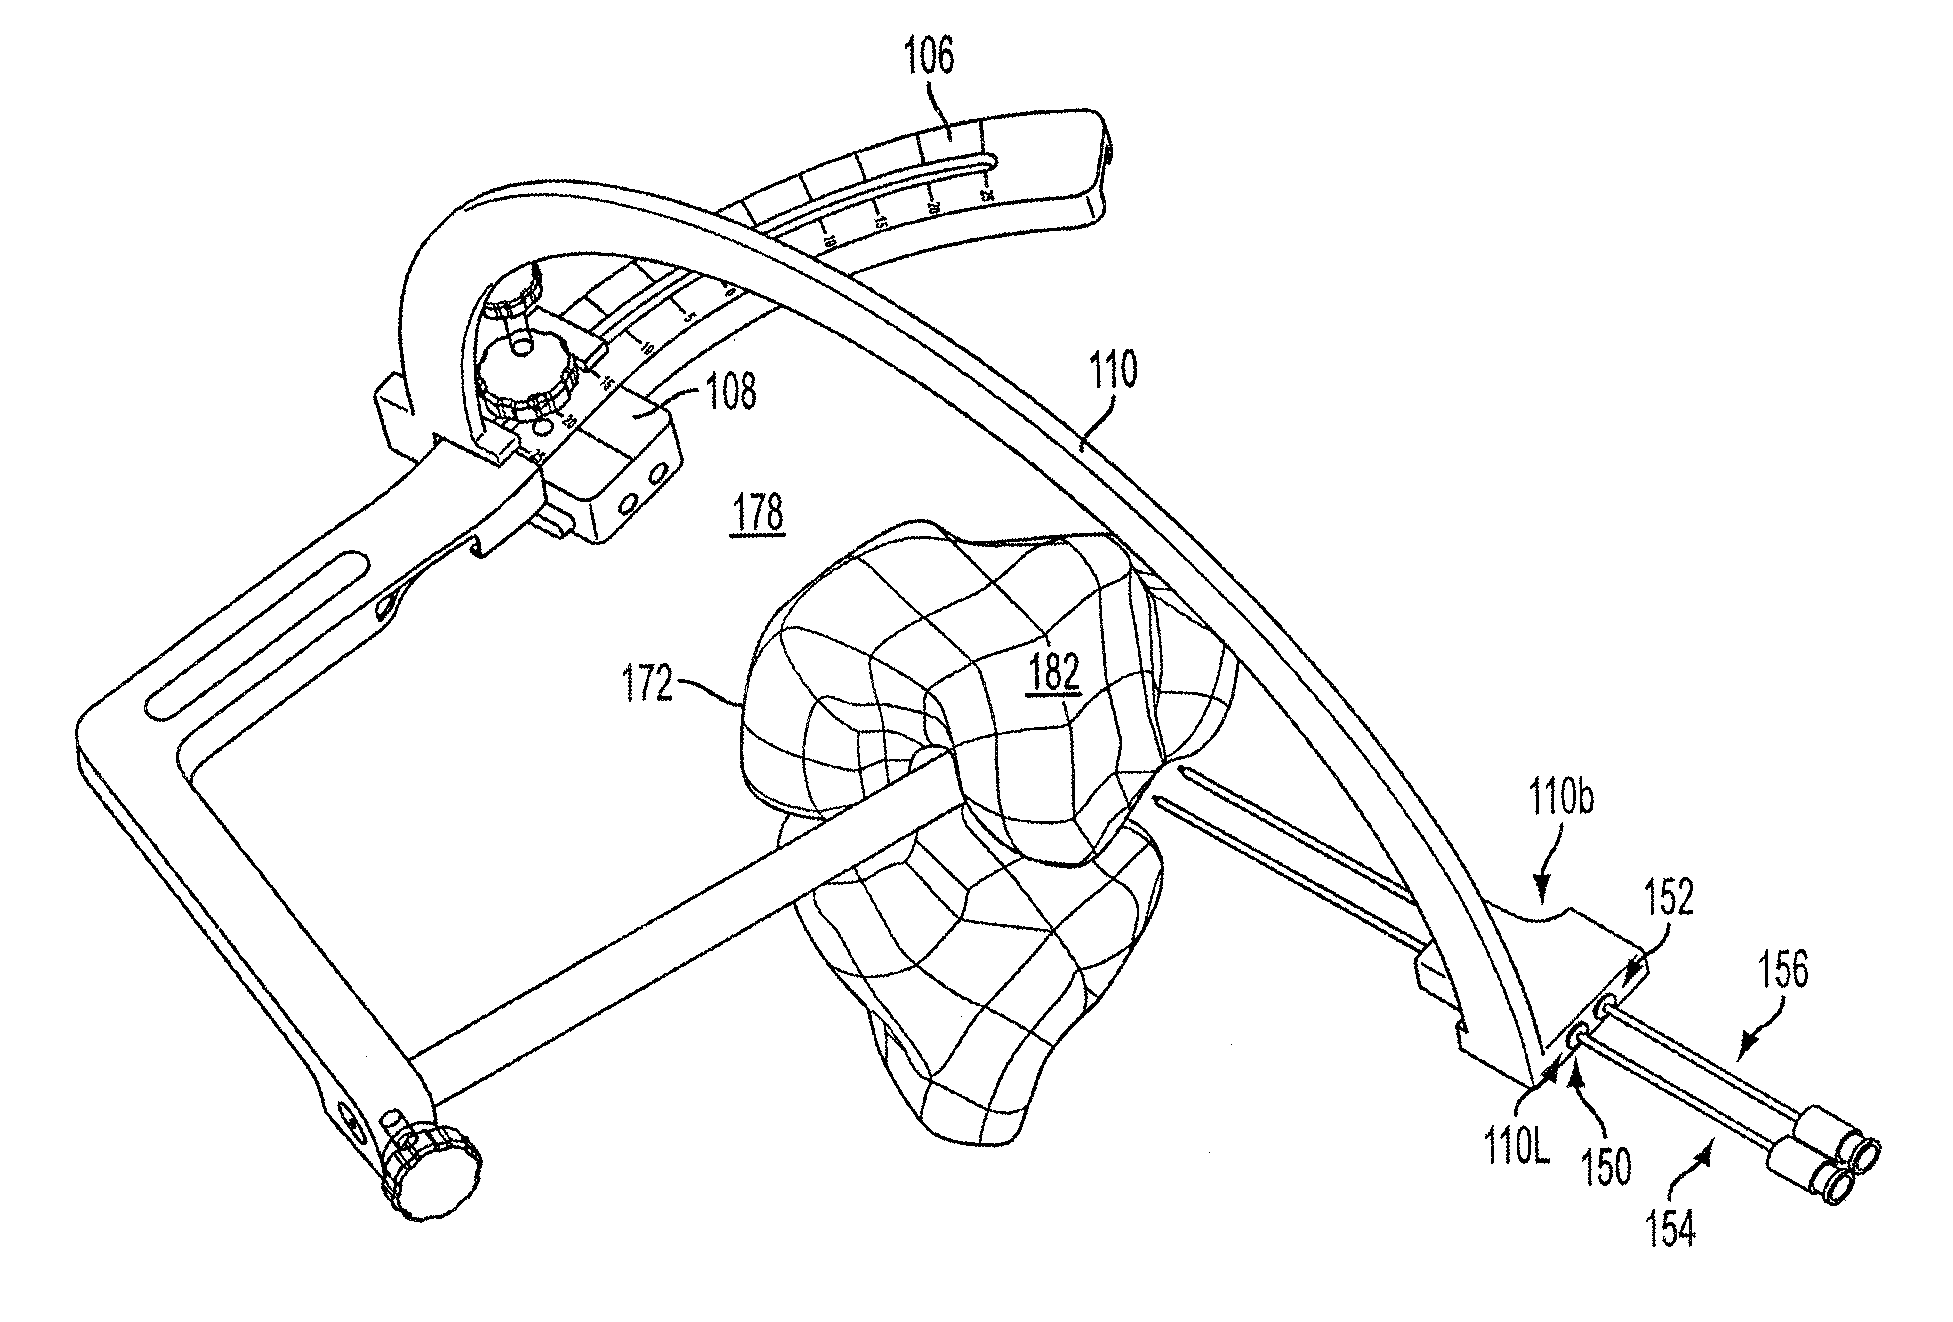 Cross Pinning Guide Devices and Methods